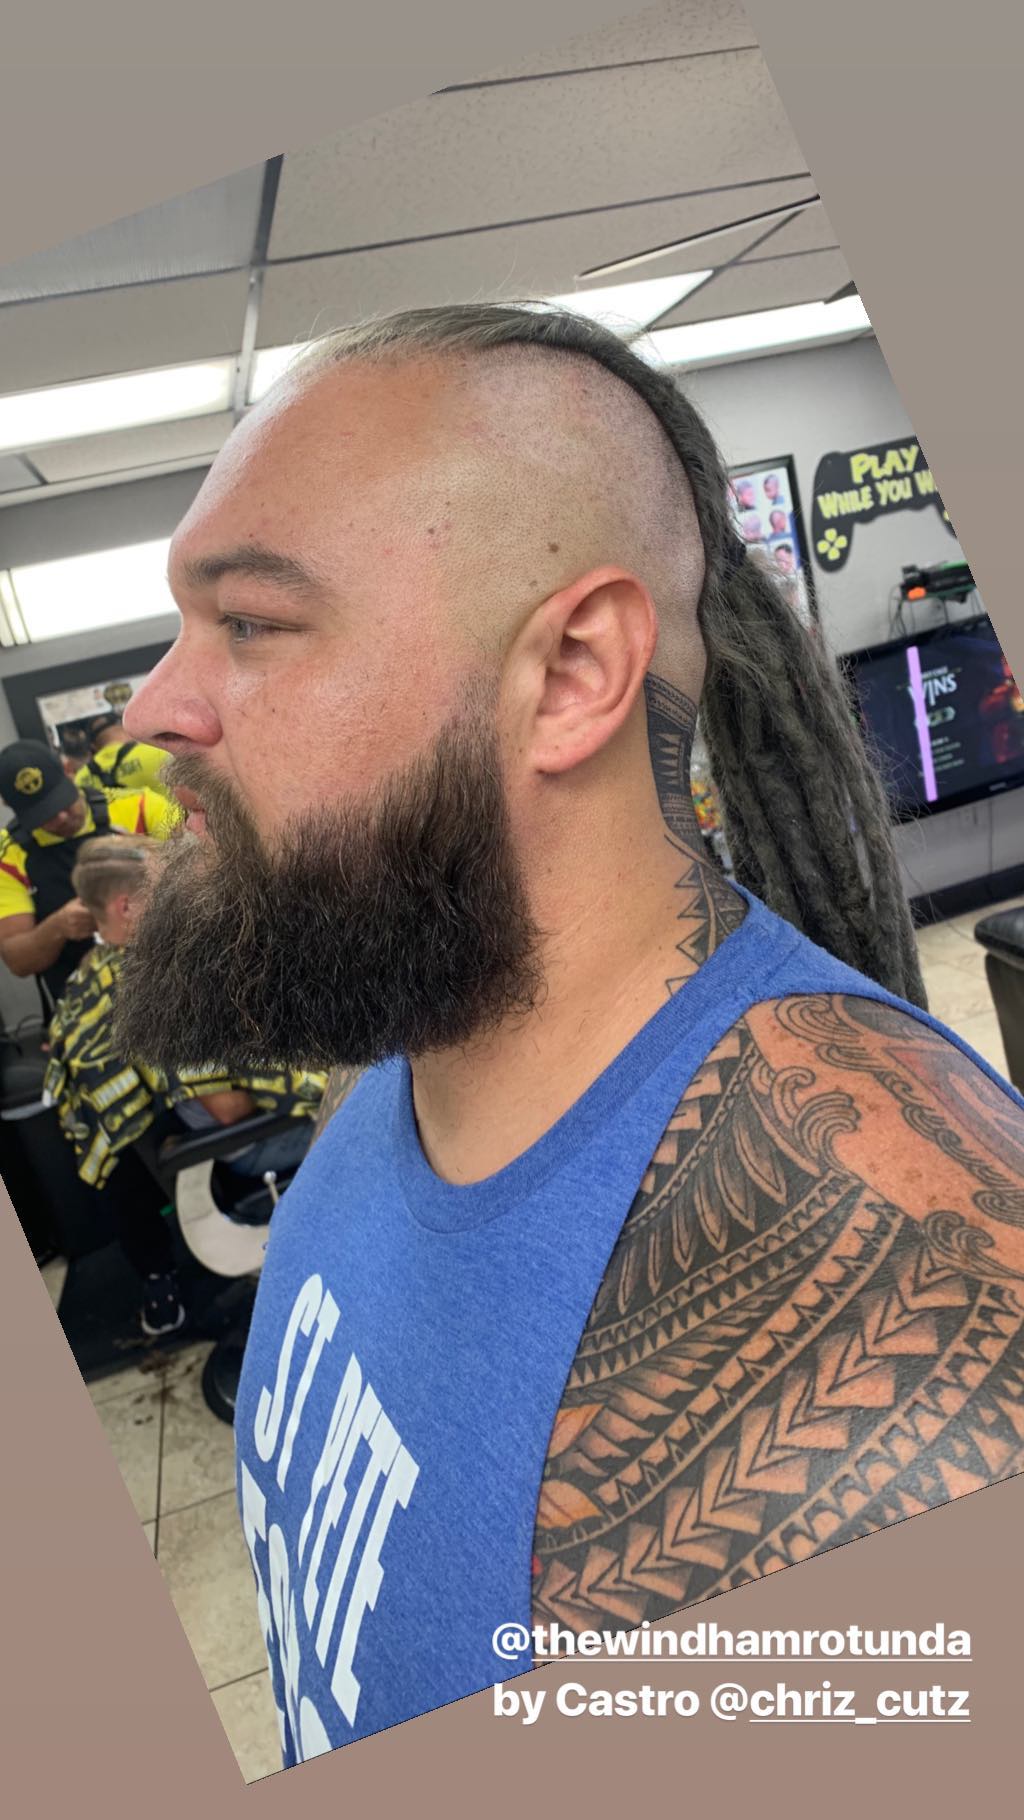 Bray Wyatt Makes An Interesting Change To His Look (Photos) - PWMania